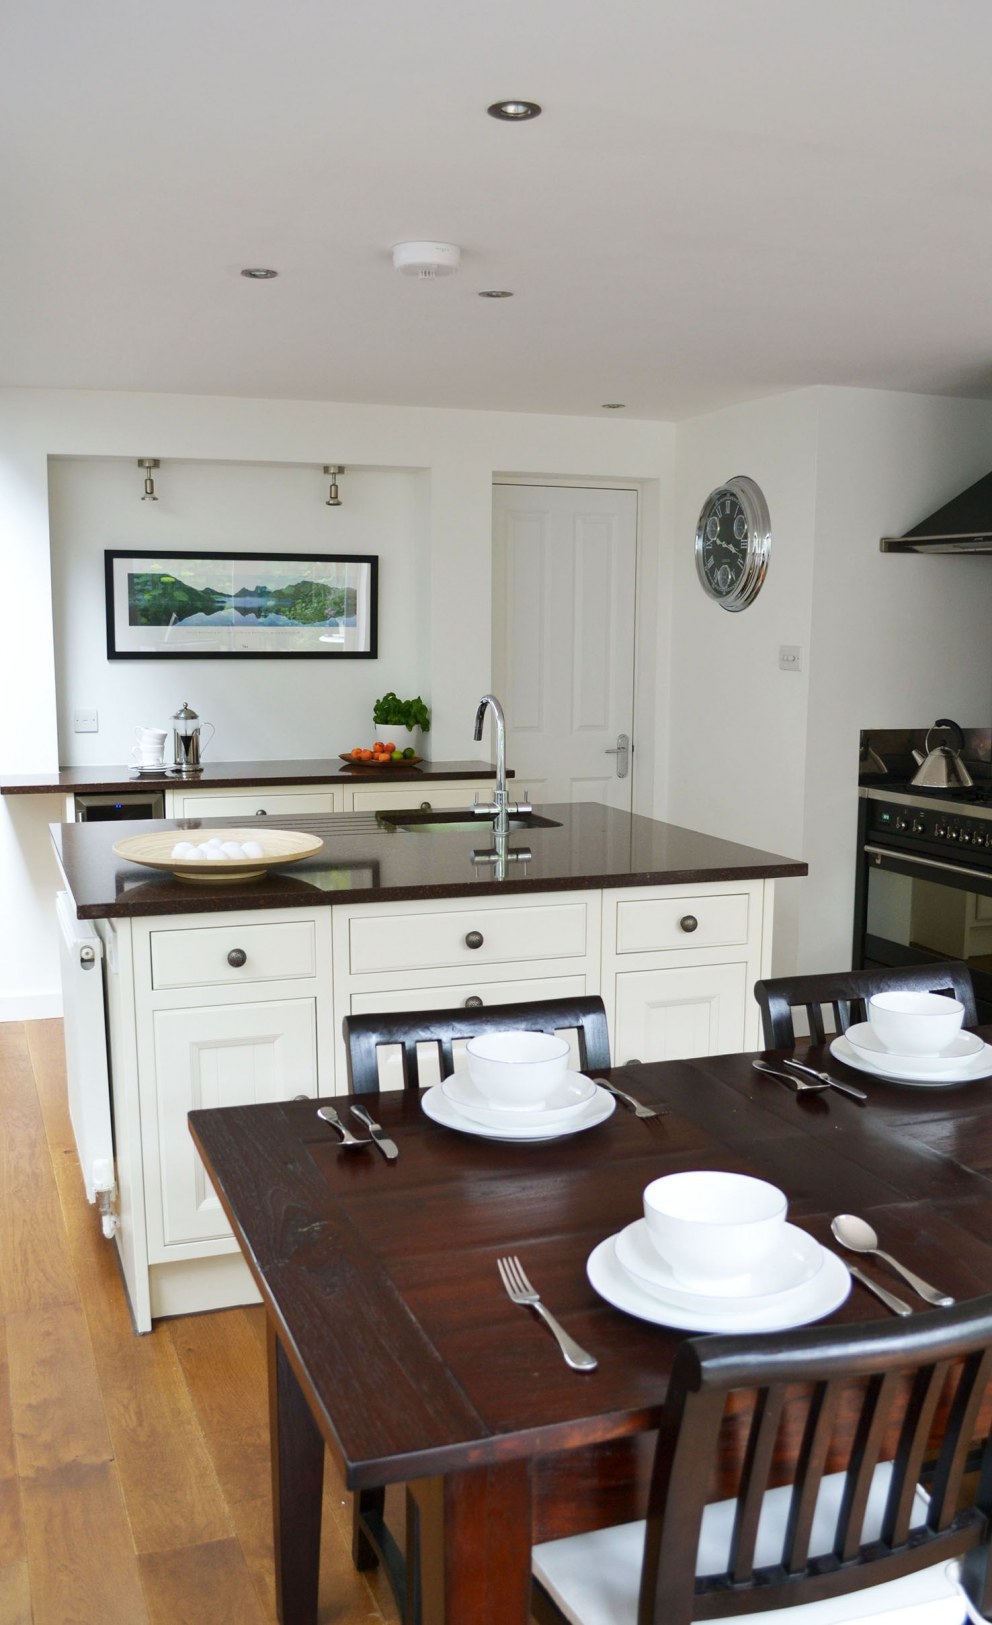 South London | Kitchen with Reflection Dining Area | Interior Designers